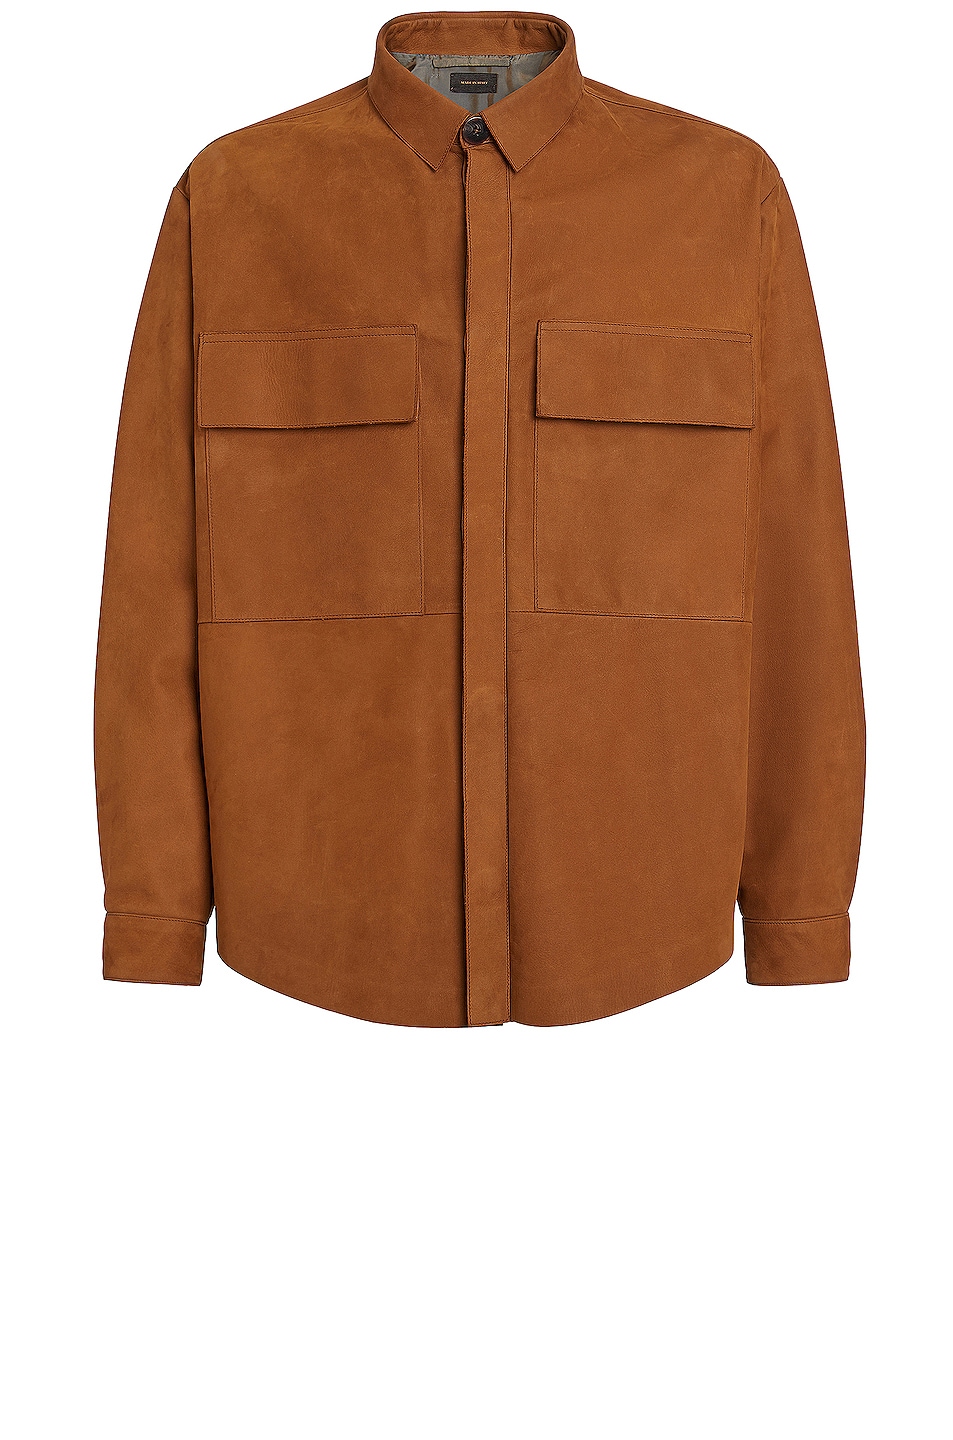 Image 1 of Fear of God Exclusively for Ermenegildo Zegna Oversized Work Style Shirt in Cognac